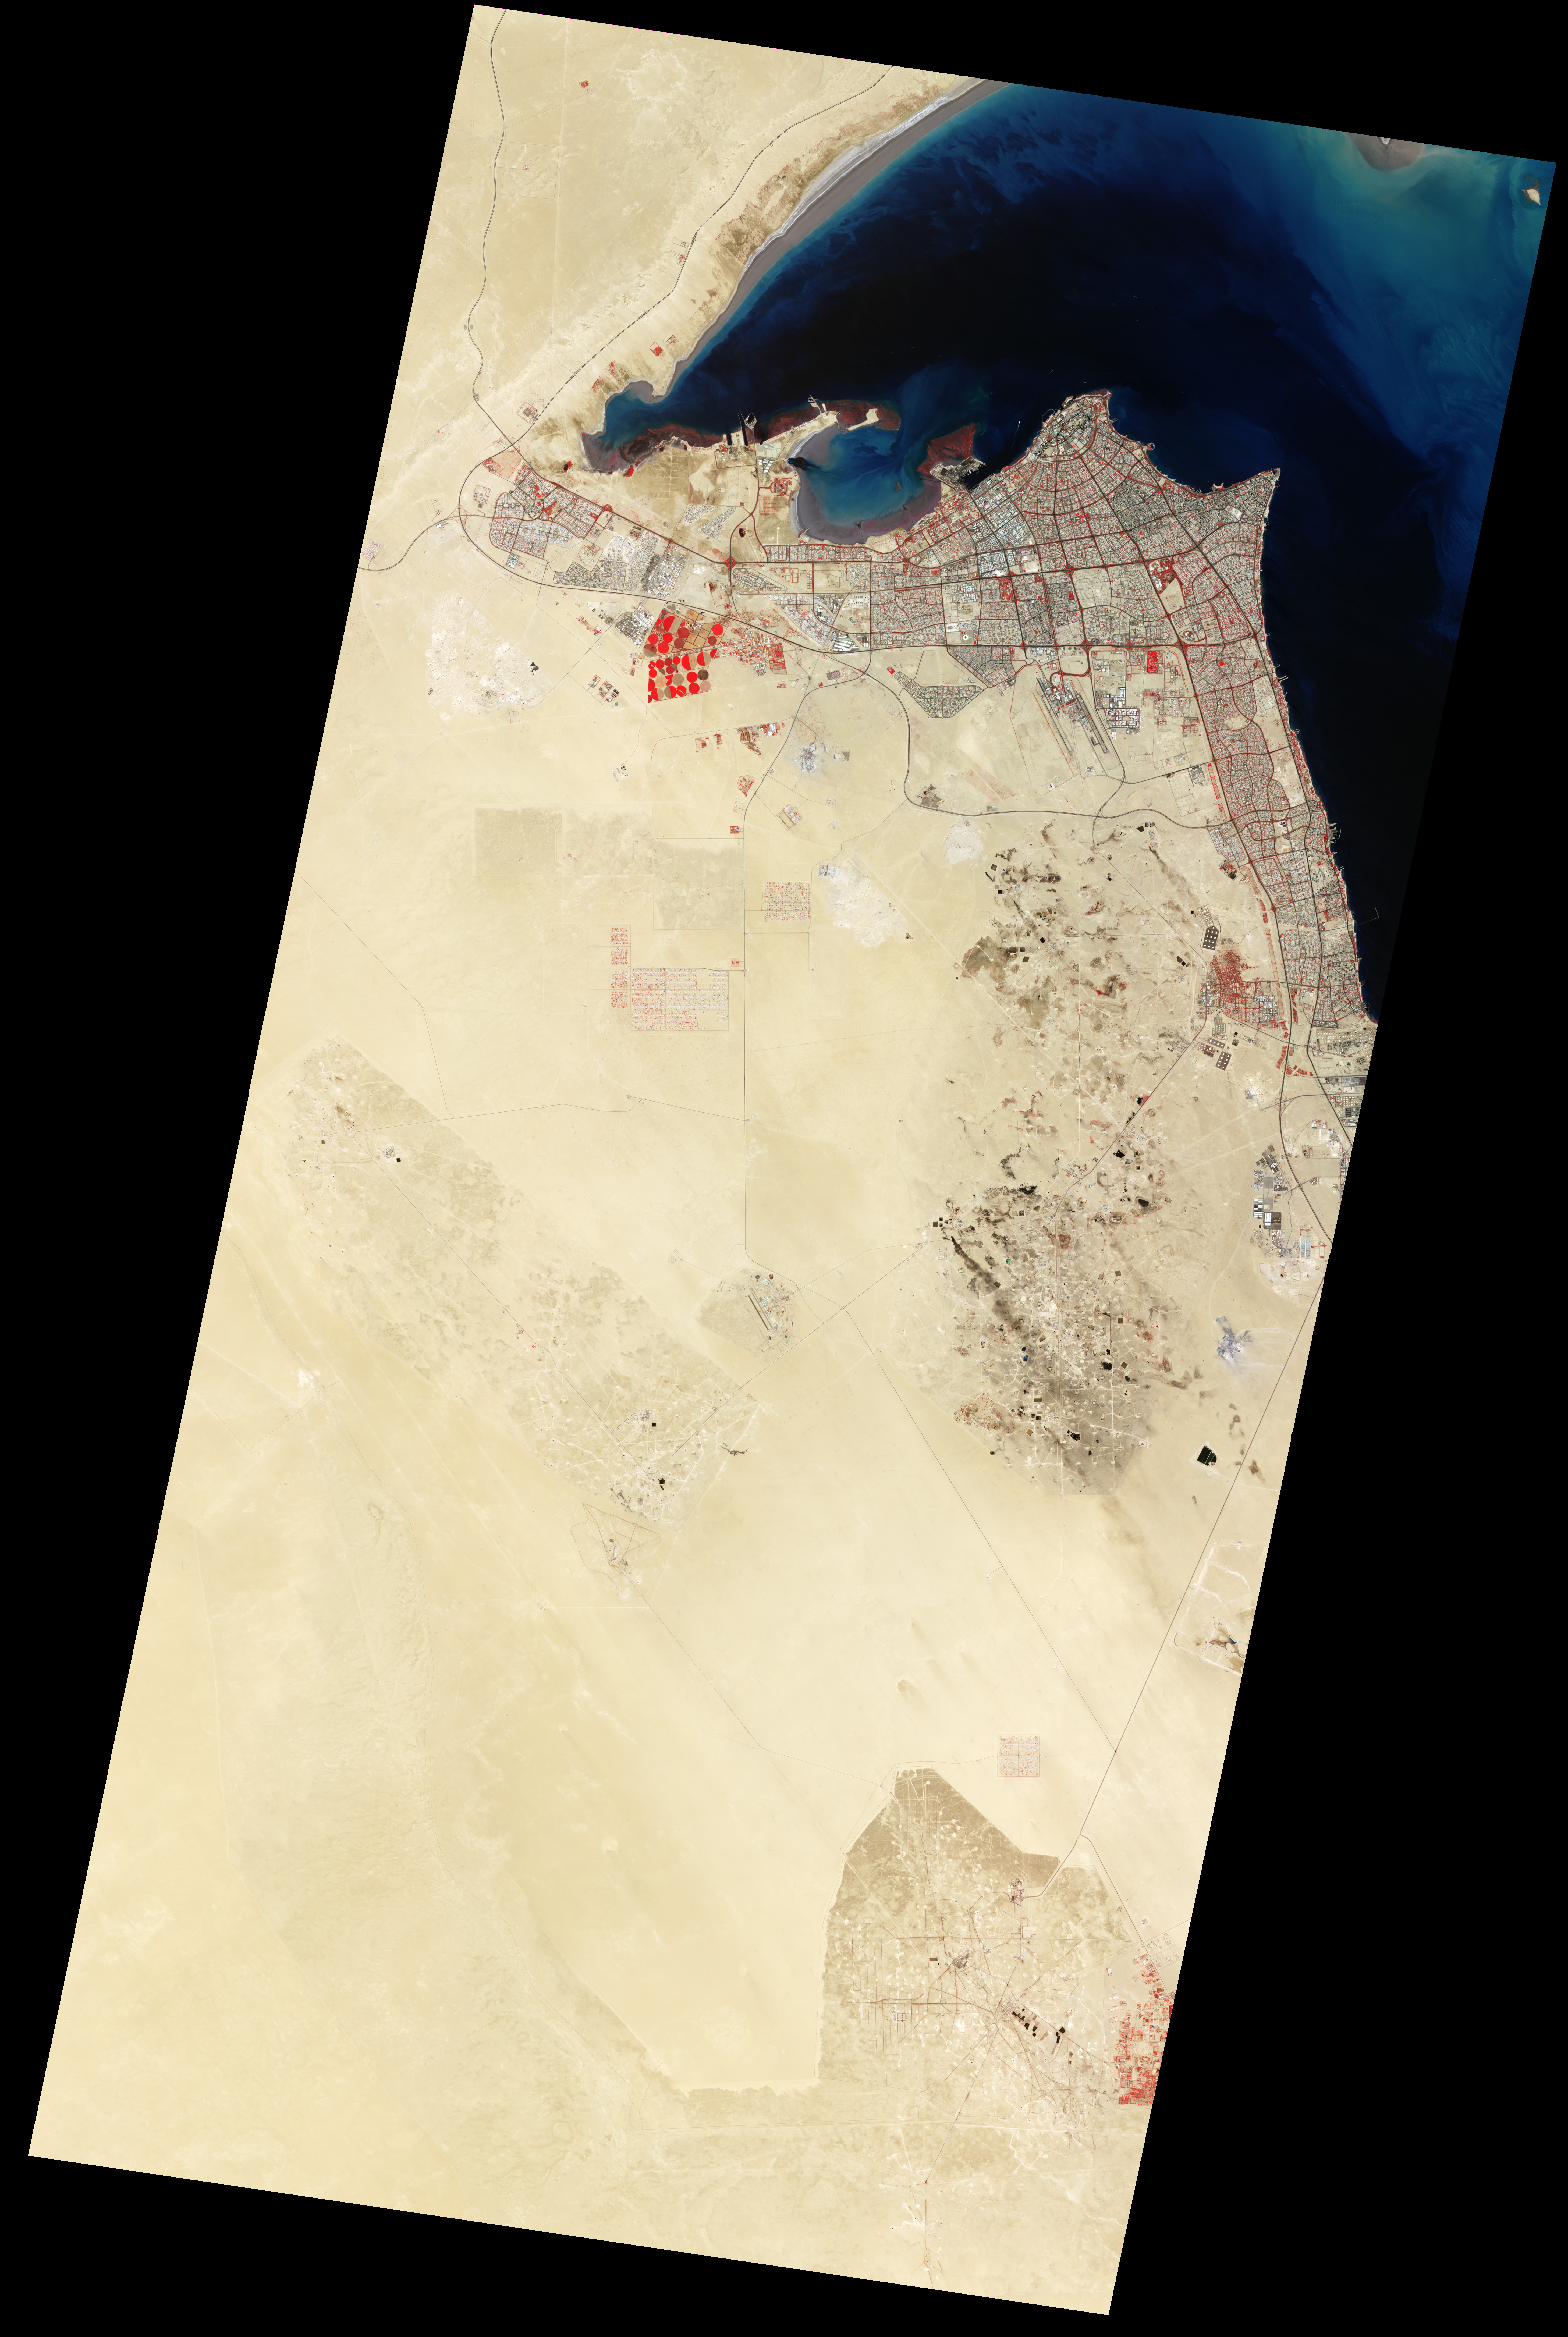 Oil Fields in Kuwait - related image preview